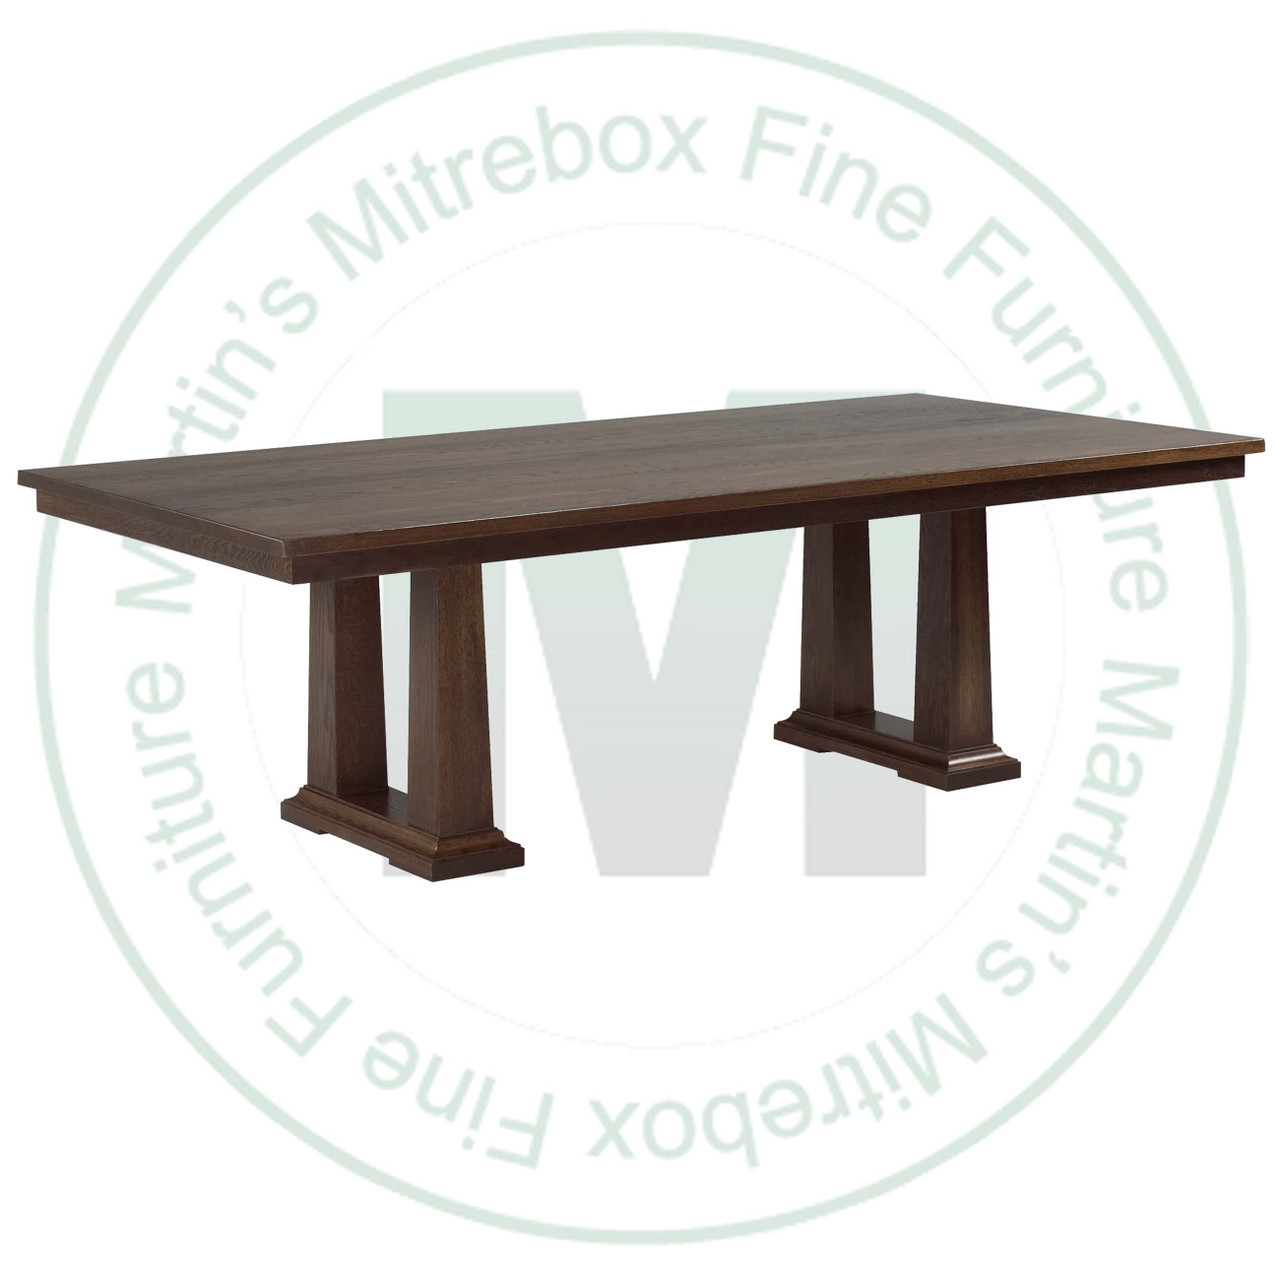 Oak Acropolis Solid Top Double Pedestal Table 48''D x 96''W x 30''H Table Has 1.75'' Thick Top And 2 - 16'' Extensions